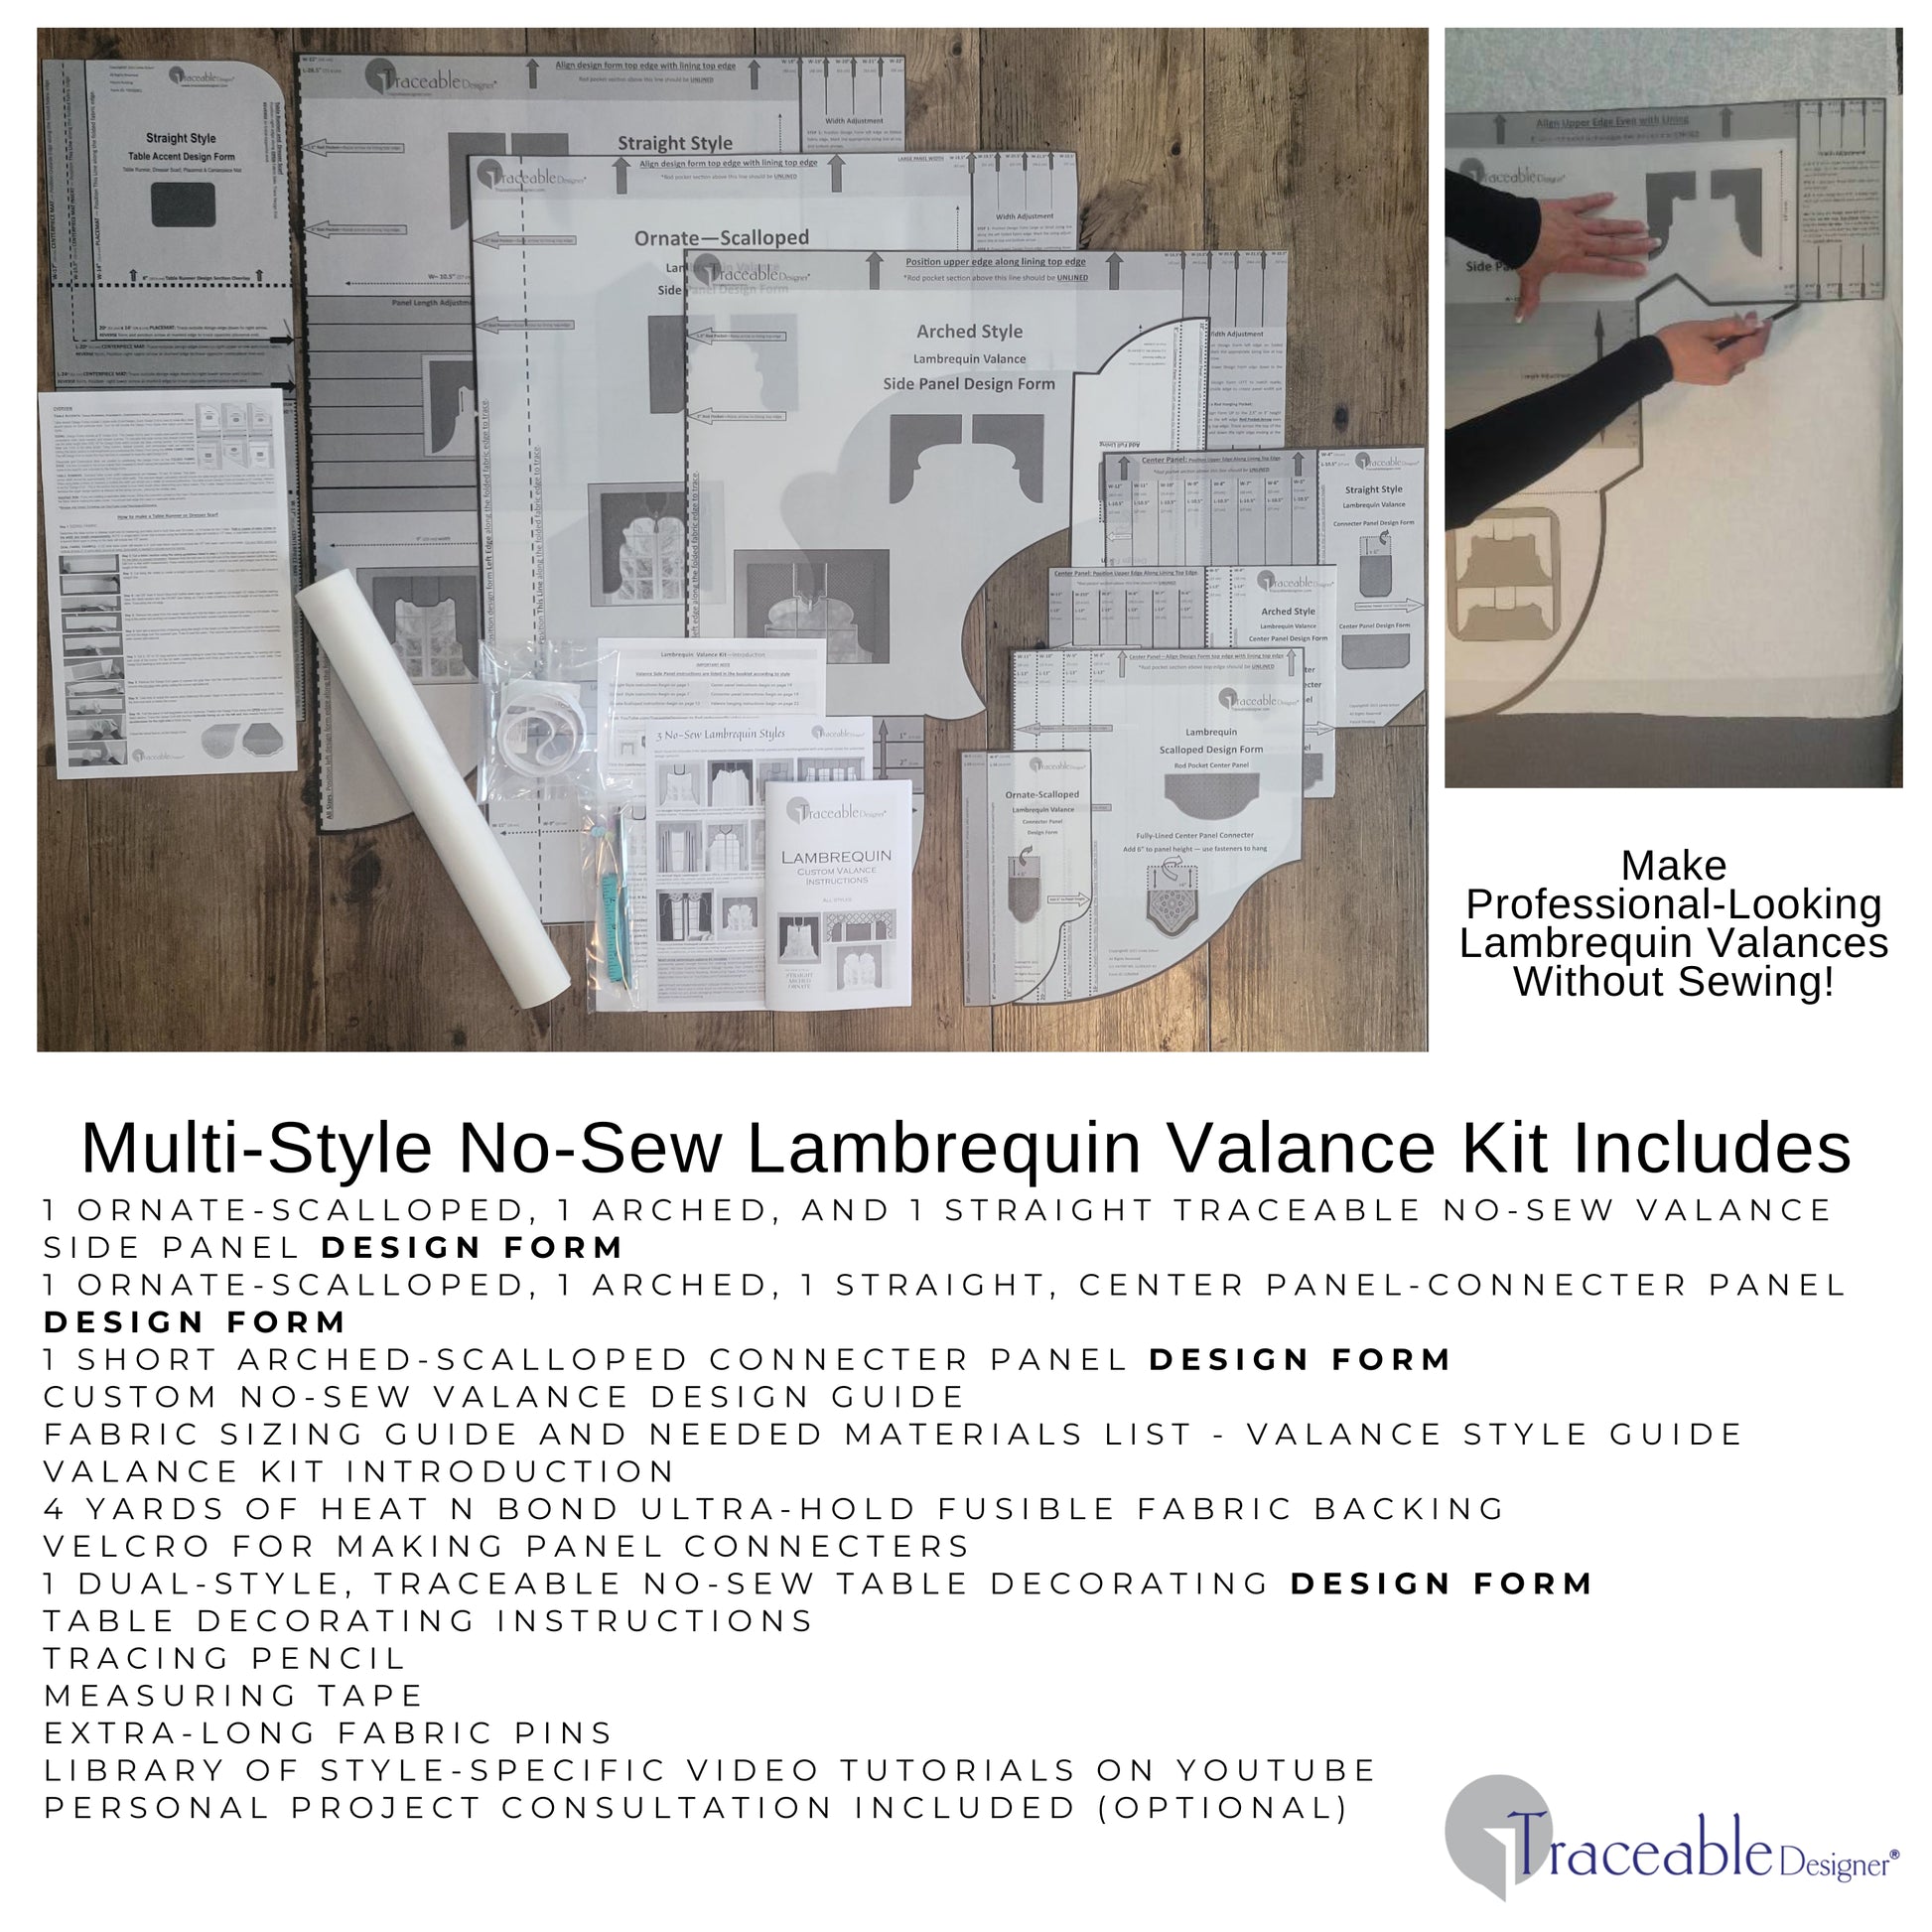 Traceable Designer multi-style no-sew lambrequin valance kit inlcudes traceable valance design forms used to make custom valances without sewing. Use a 1" curtain rod.